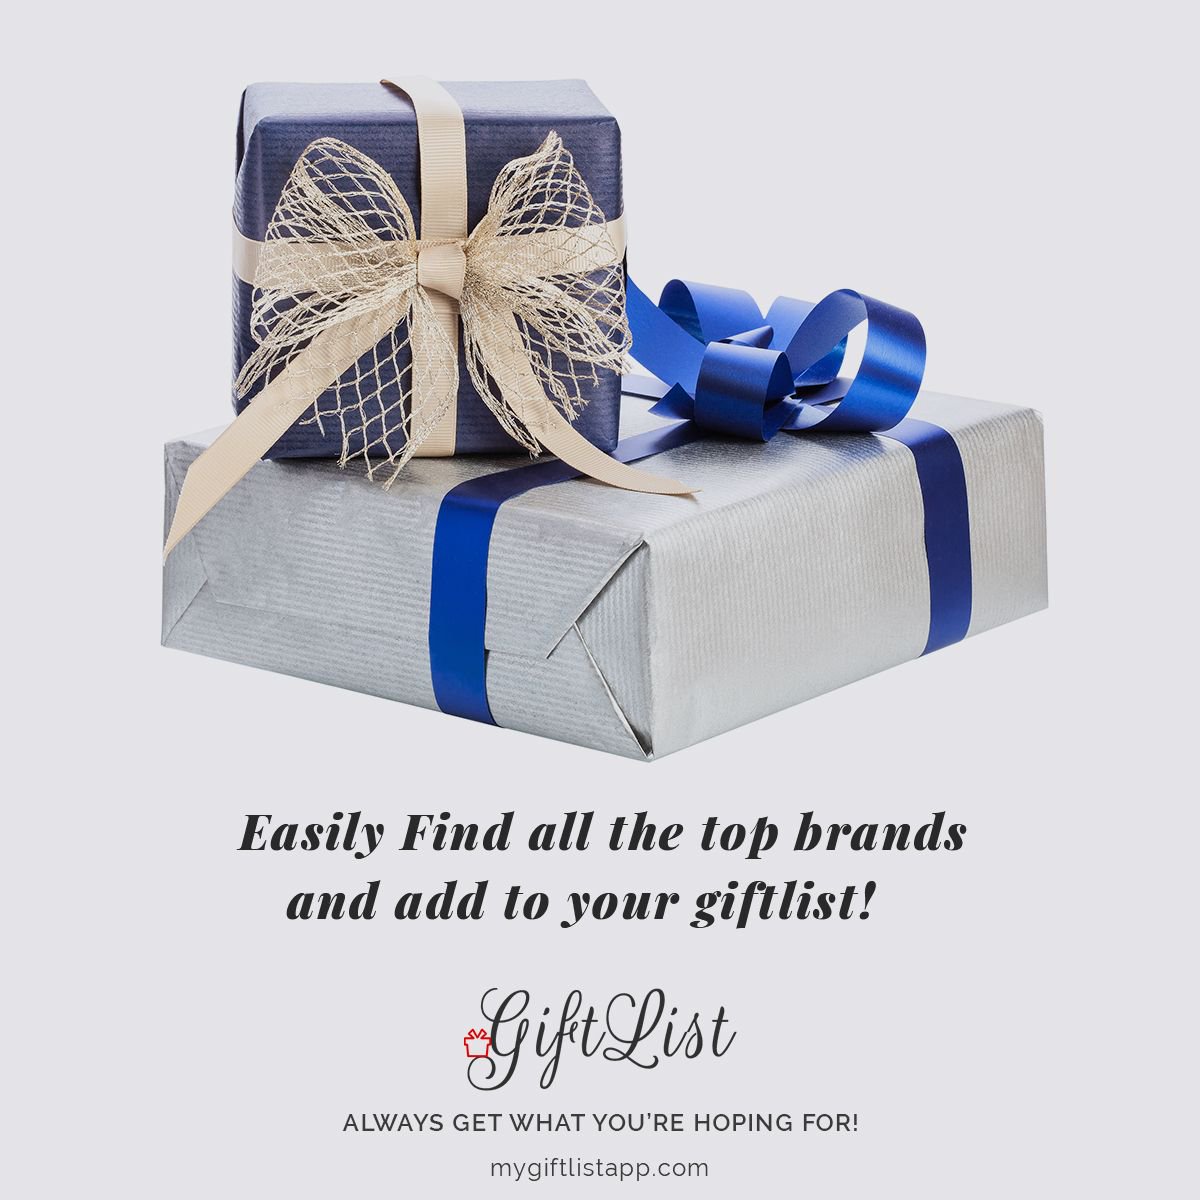 Download the Giftlist App NOW! Always get what you're hoping for! 
👇
smarturl.it/giftlist

#giftlistapp #alwaysgetwhatyoure #create #share #giftlist #love #downloadtheapp